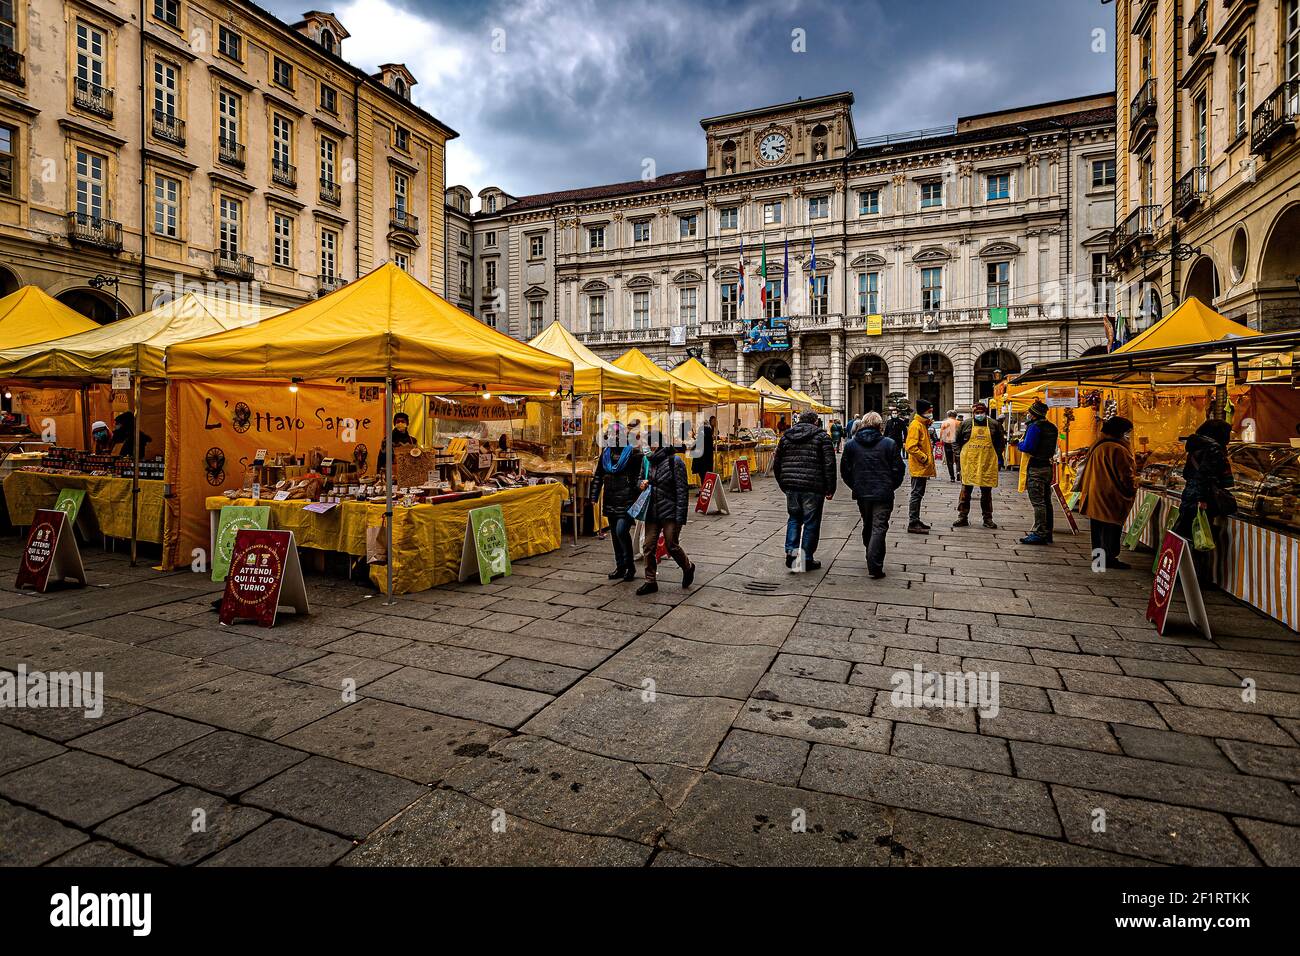 Italy Piedmont Turin - Piazza palazzo di Città - Market Of Typical Product during the Pandemic Stock Photo